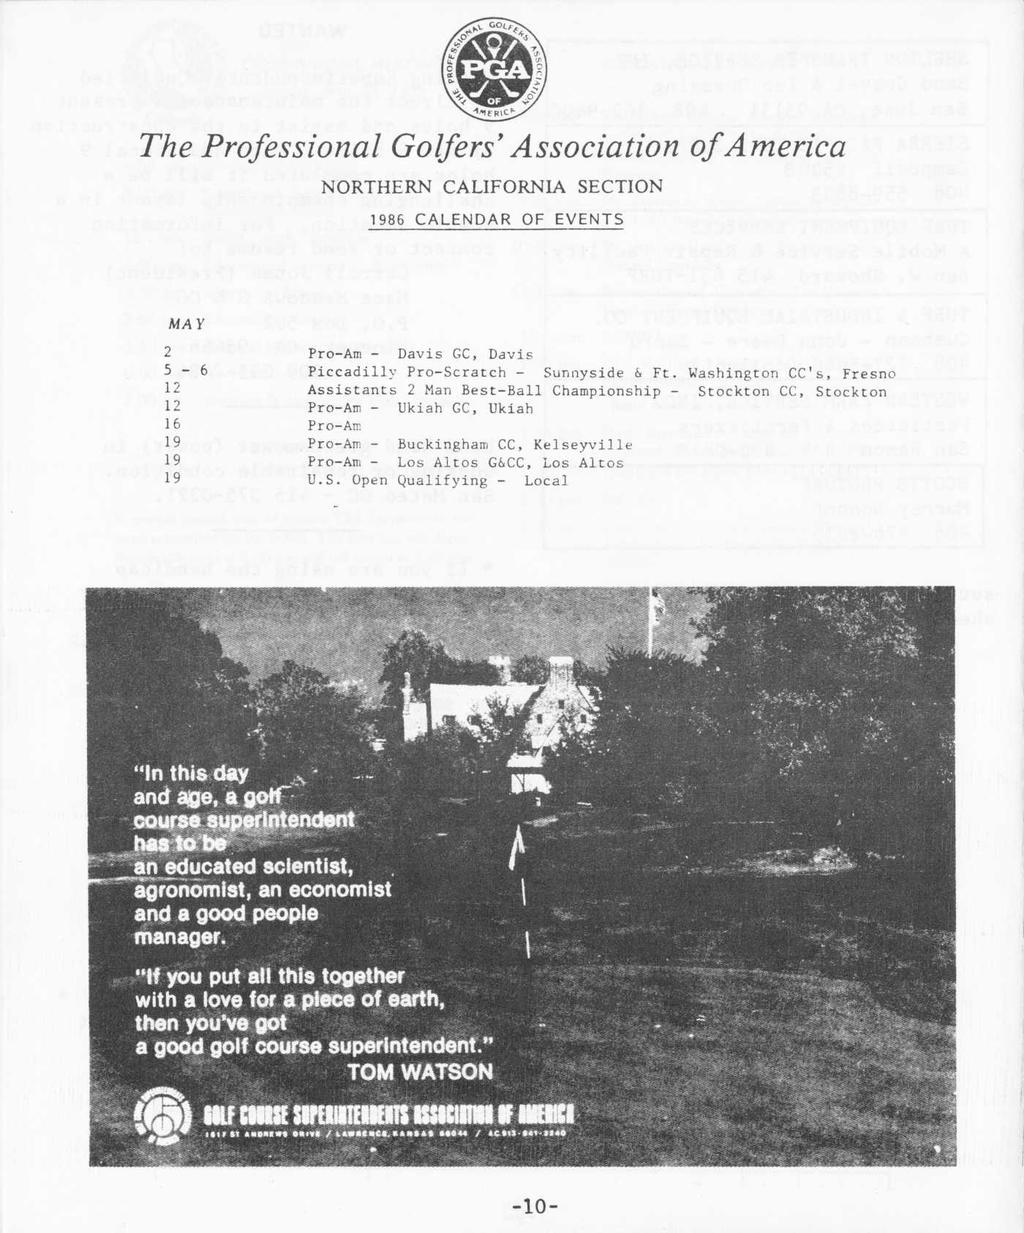 The Professional Golfers Association of America NORTHERN CALIFORNIA SECTION 1986 CALENDAR OF EVENTS MA Y 2 Pro-Am - Davis GC, Davis 5-6 Piccadilly Pro-Scratch - Sunnyside & Ft.